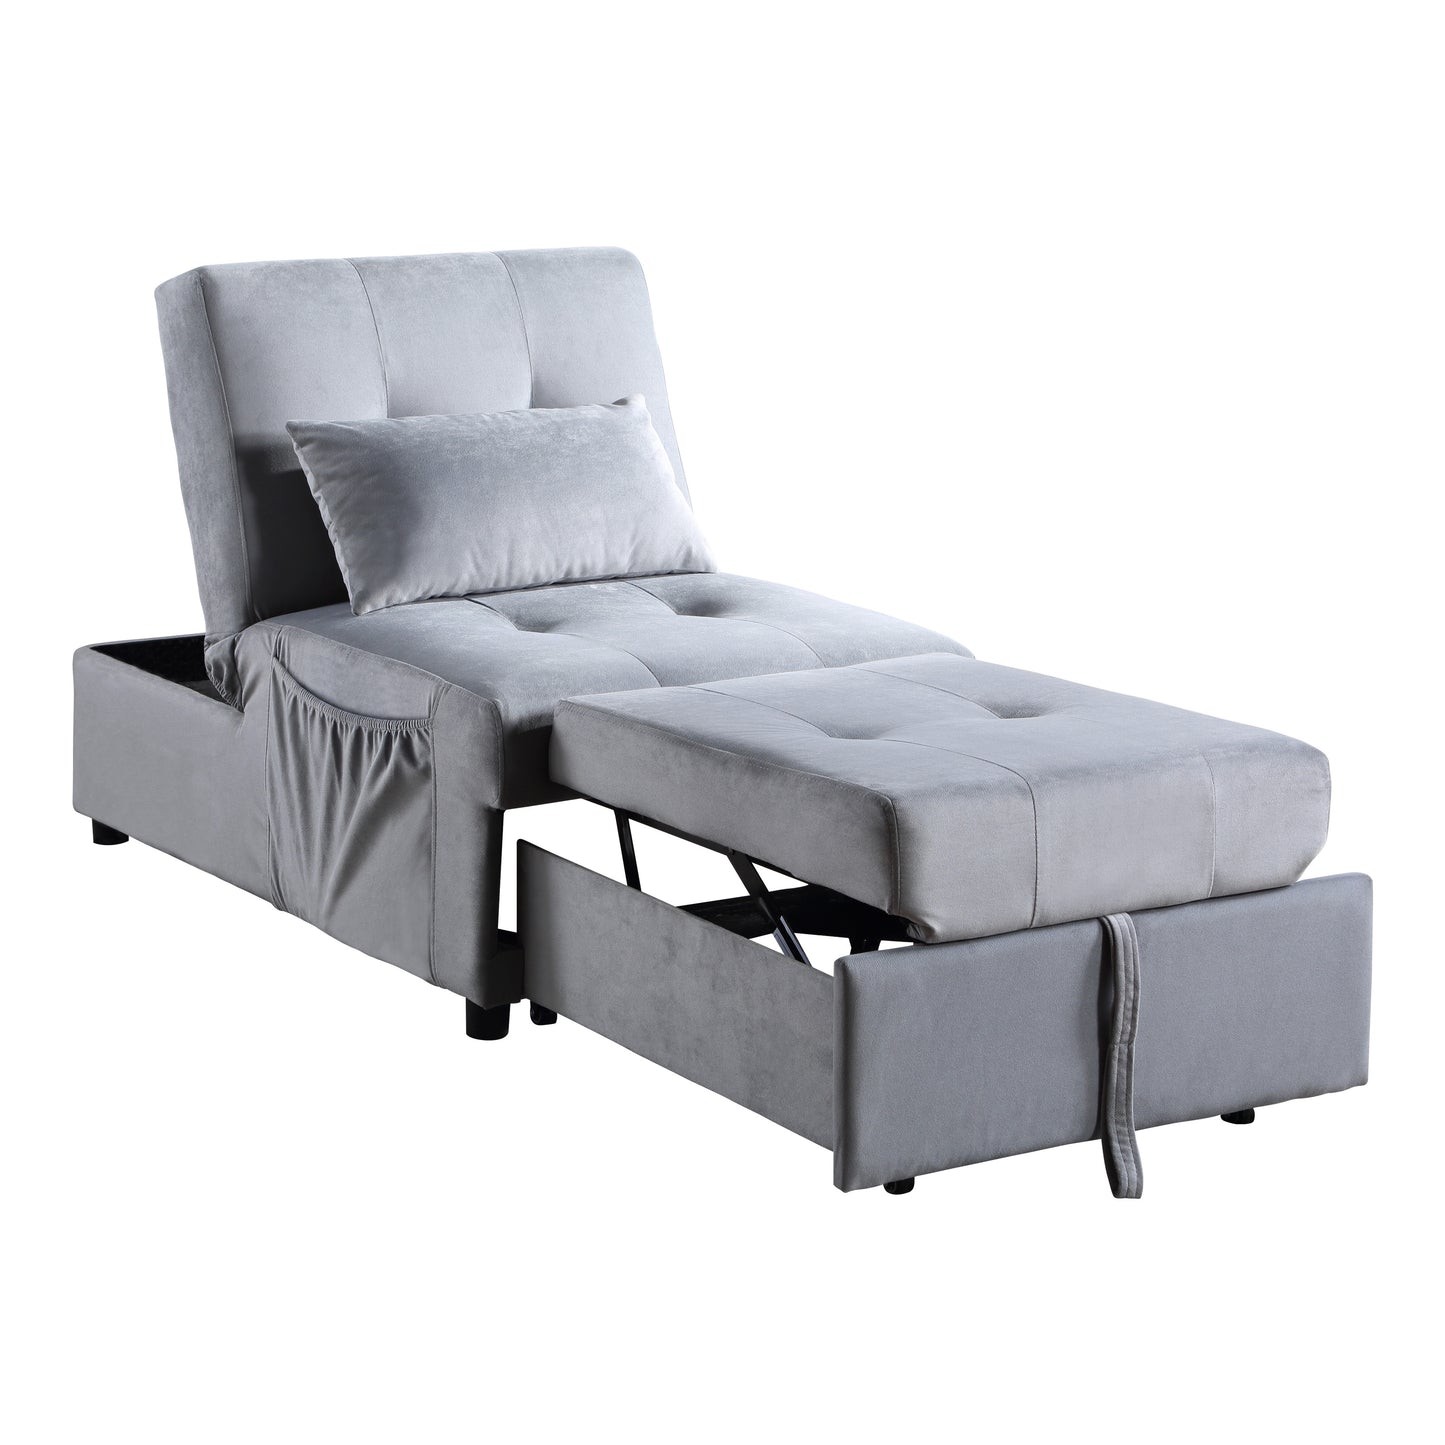 Garrell Lift Top Storage Ottoman with Pull-out Bed GREY